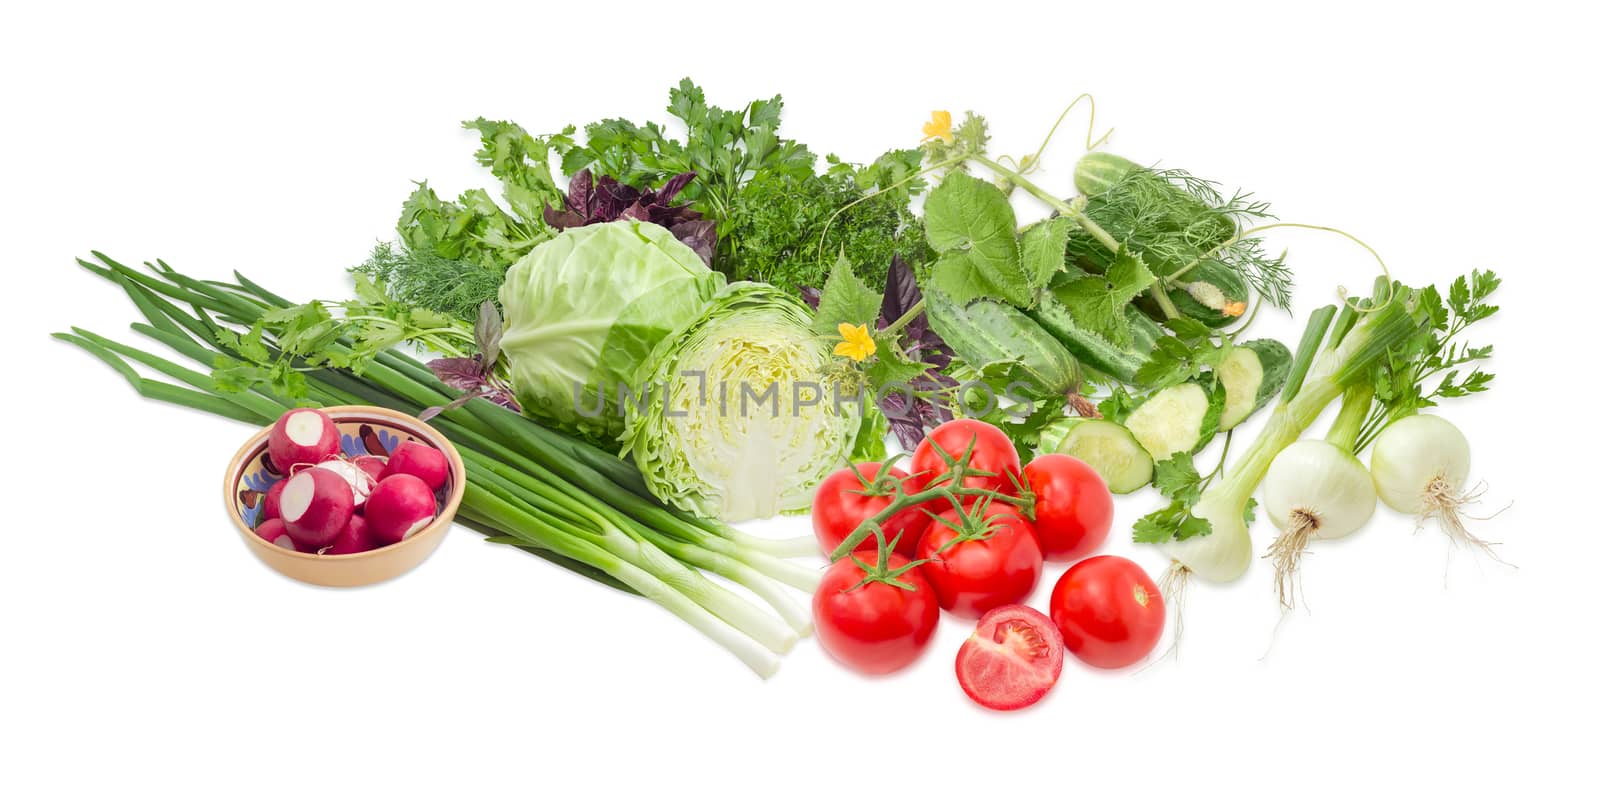 Pile of different vegetables and potherb on a light background by anmbph